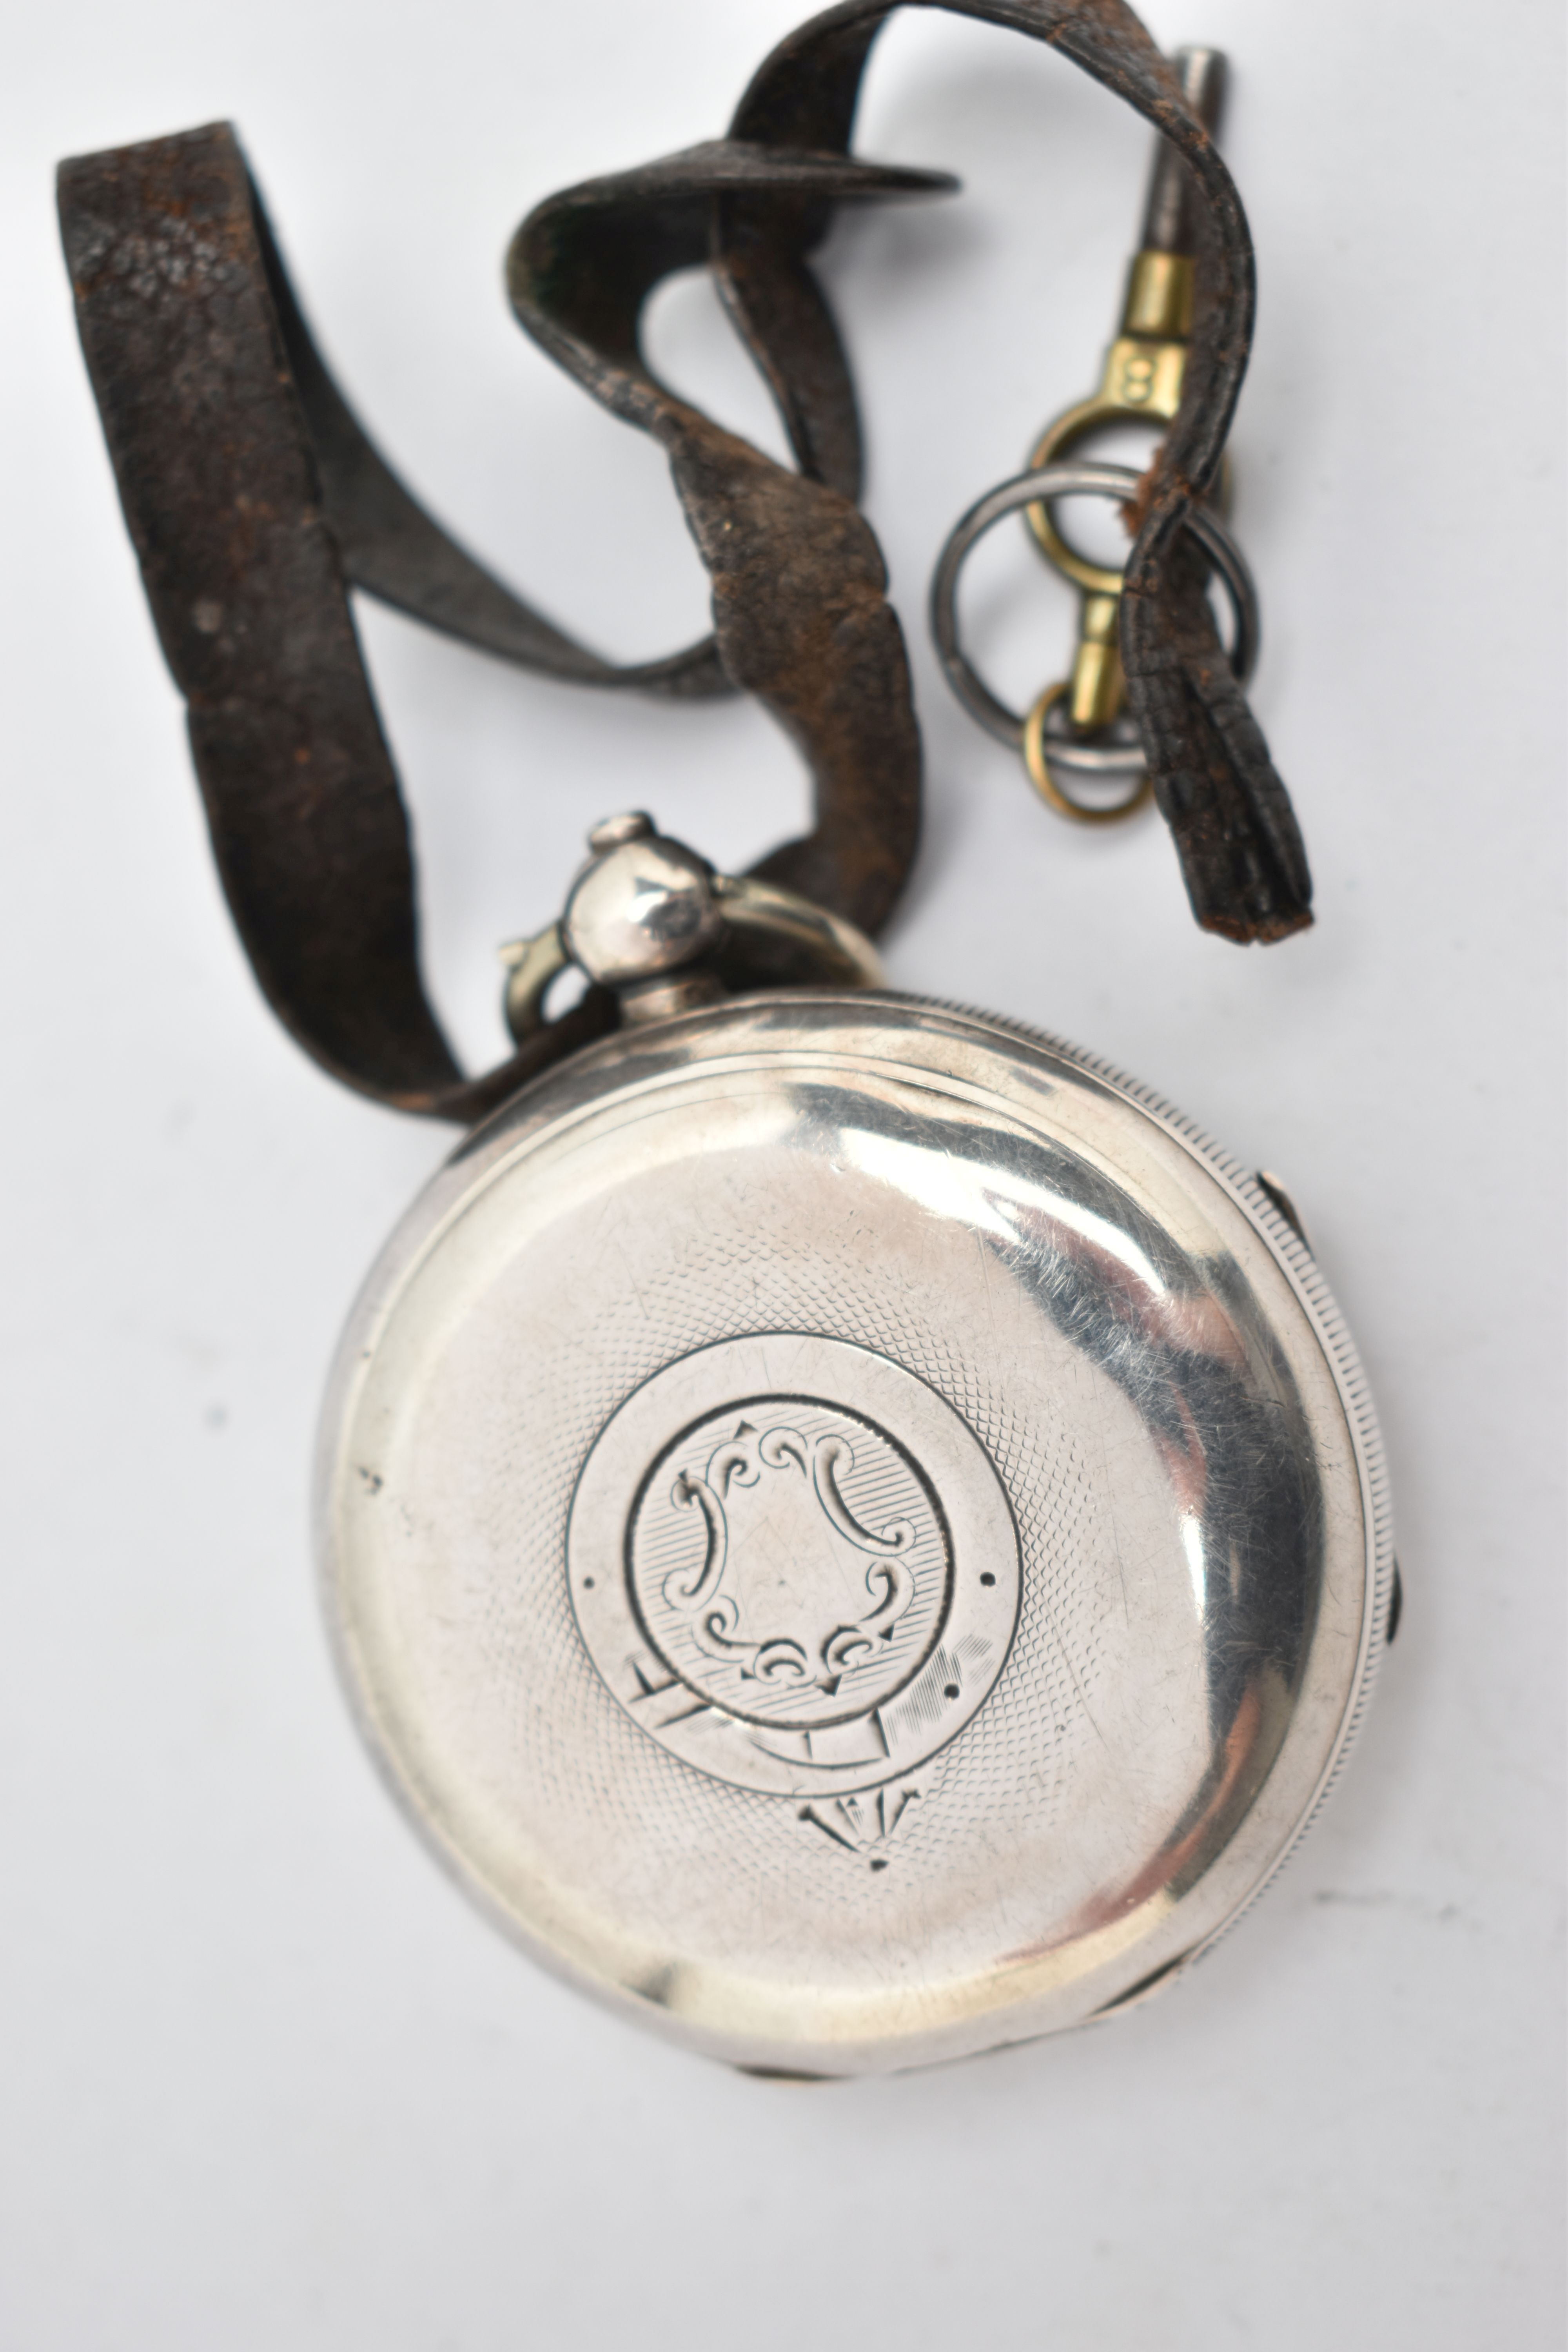 AN EDWARDIAN SILVER OPEN FACE POCKET WATCH, the white face with black Roman numerals, subsidiary - Image 2 of 4